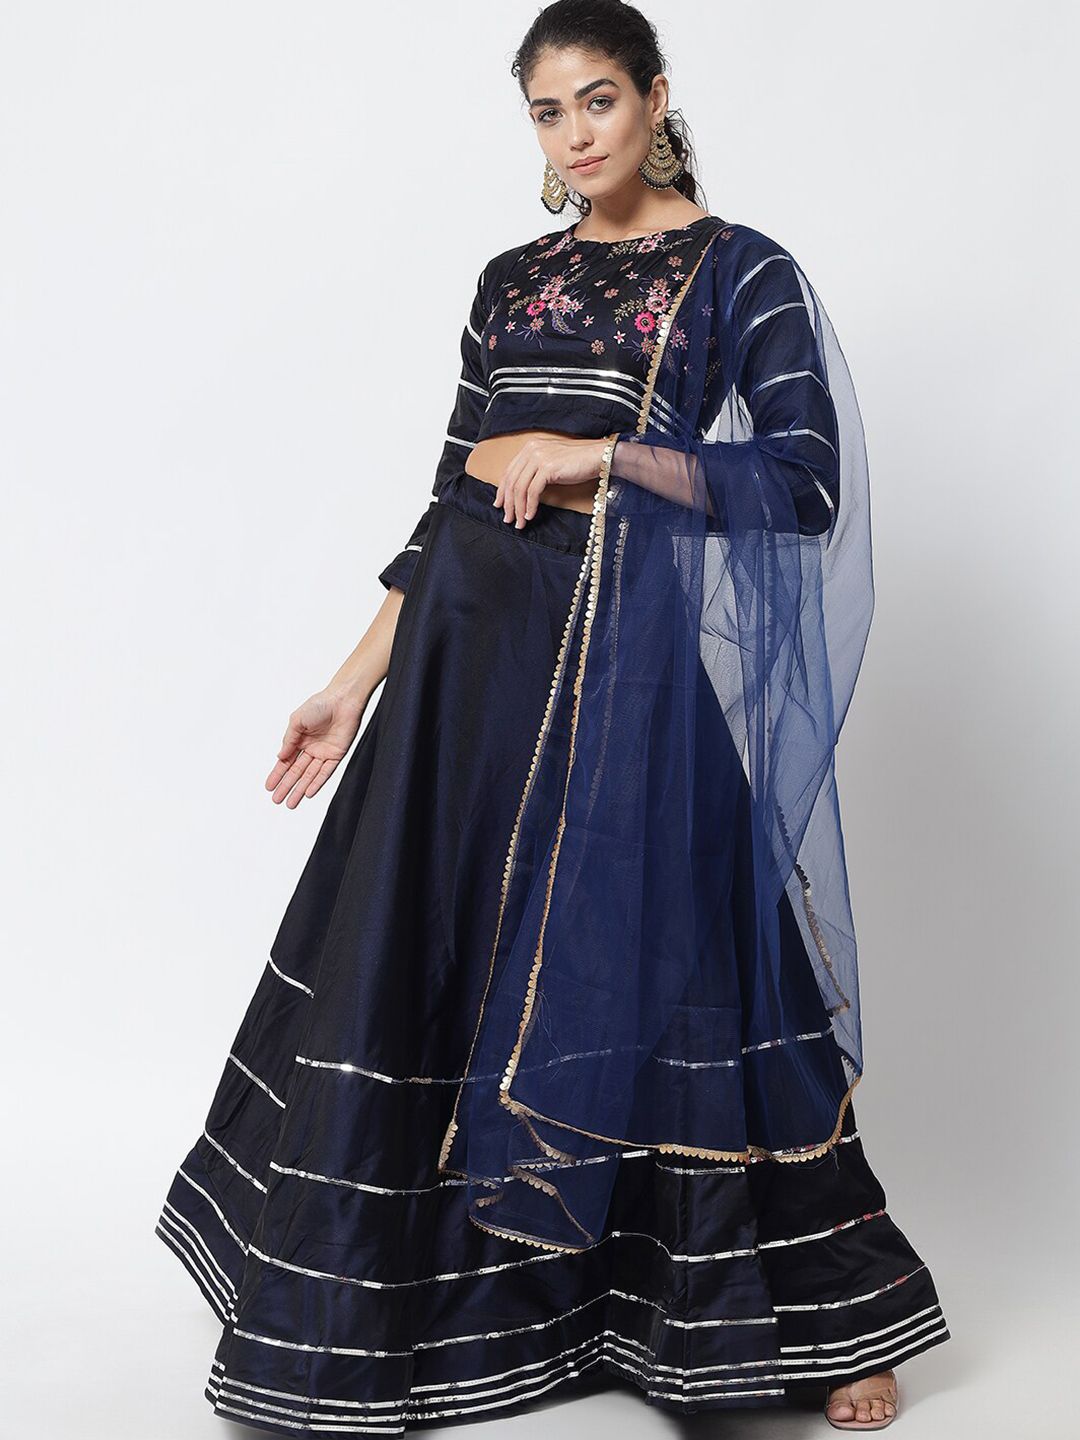 DIVASTRI Navy Blue Embroidered Semi-Stitched Lehenga & Unstitched Blouse With Dupatta Price in India